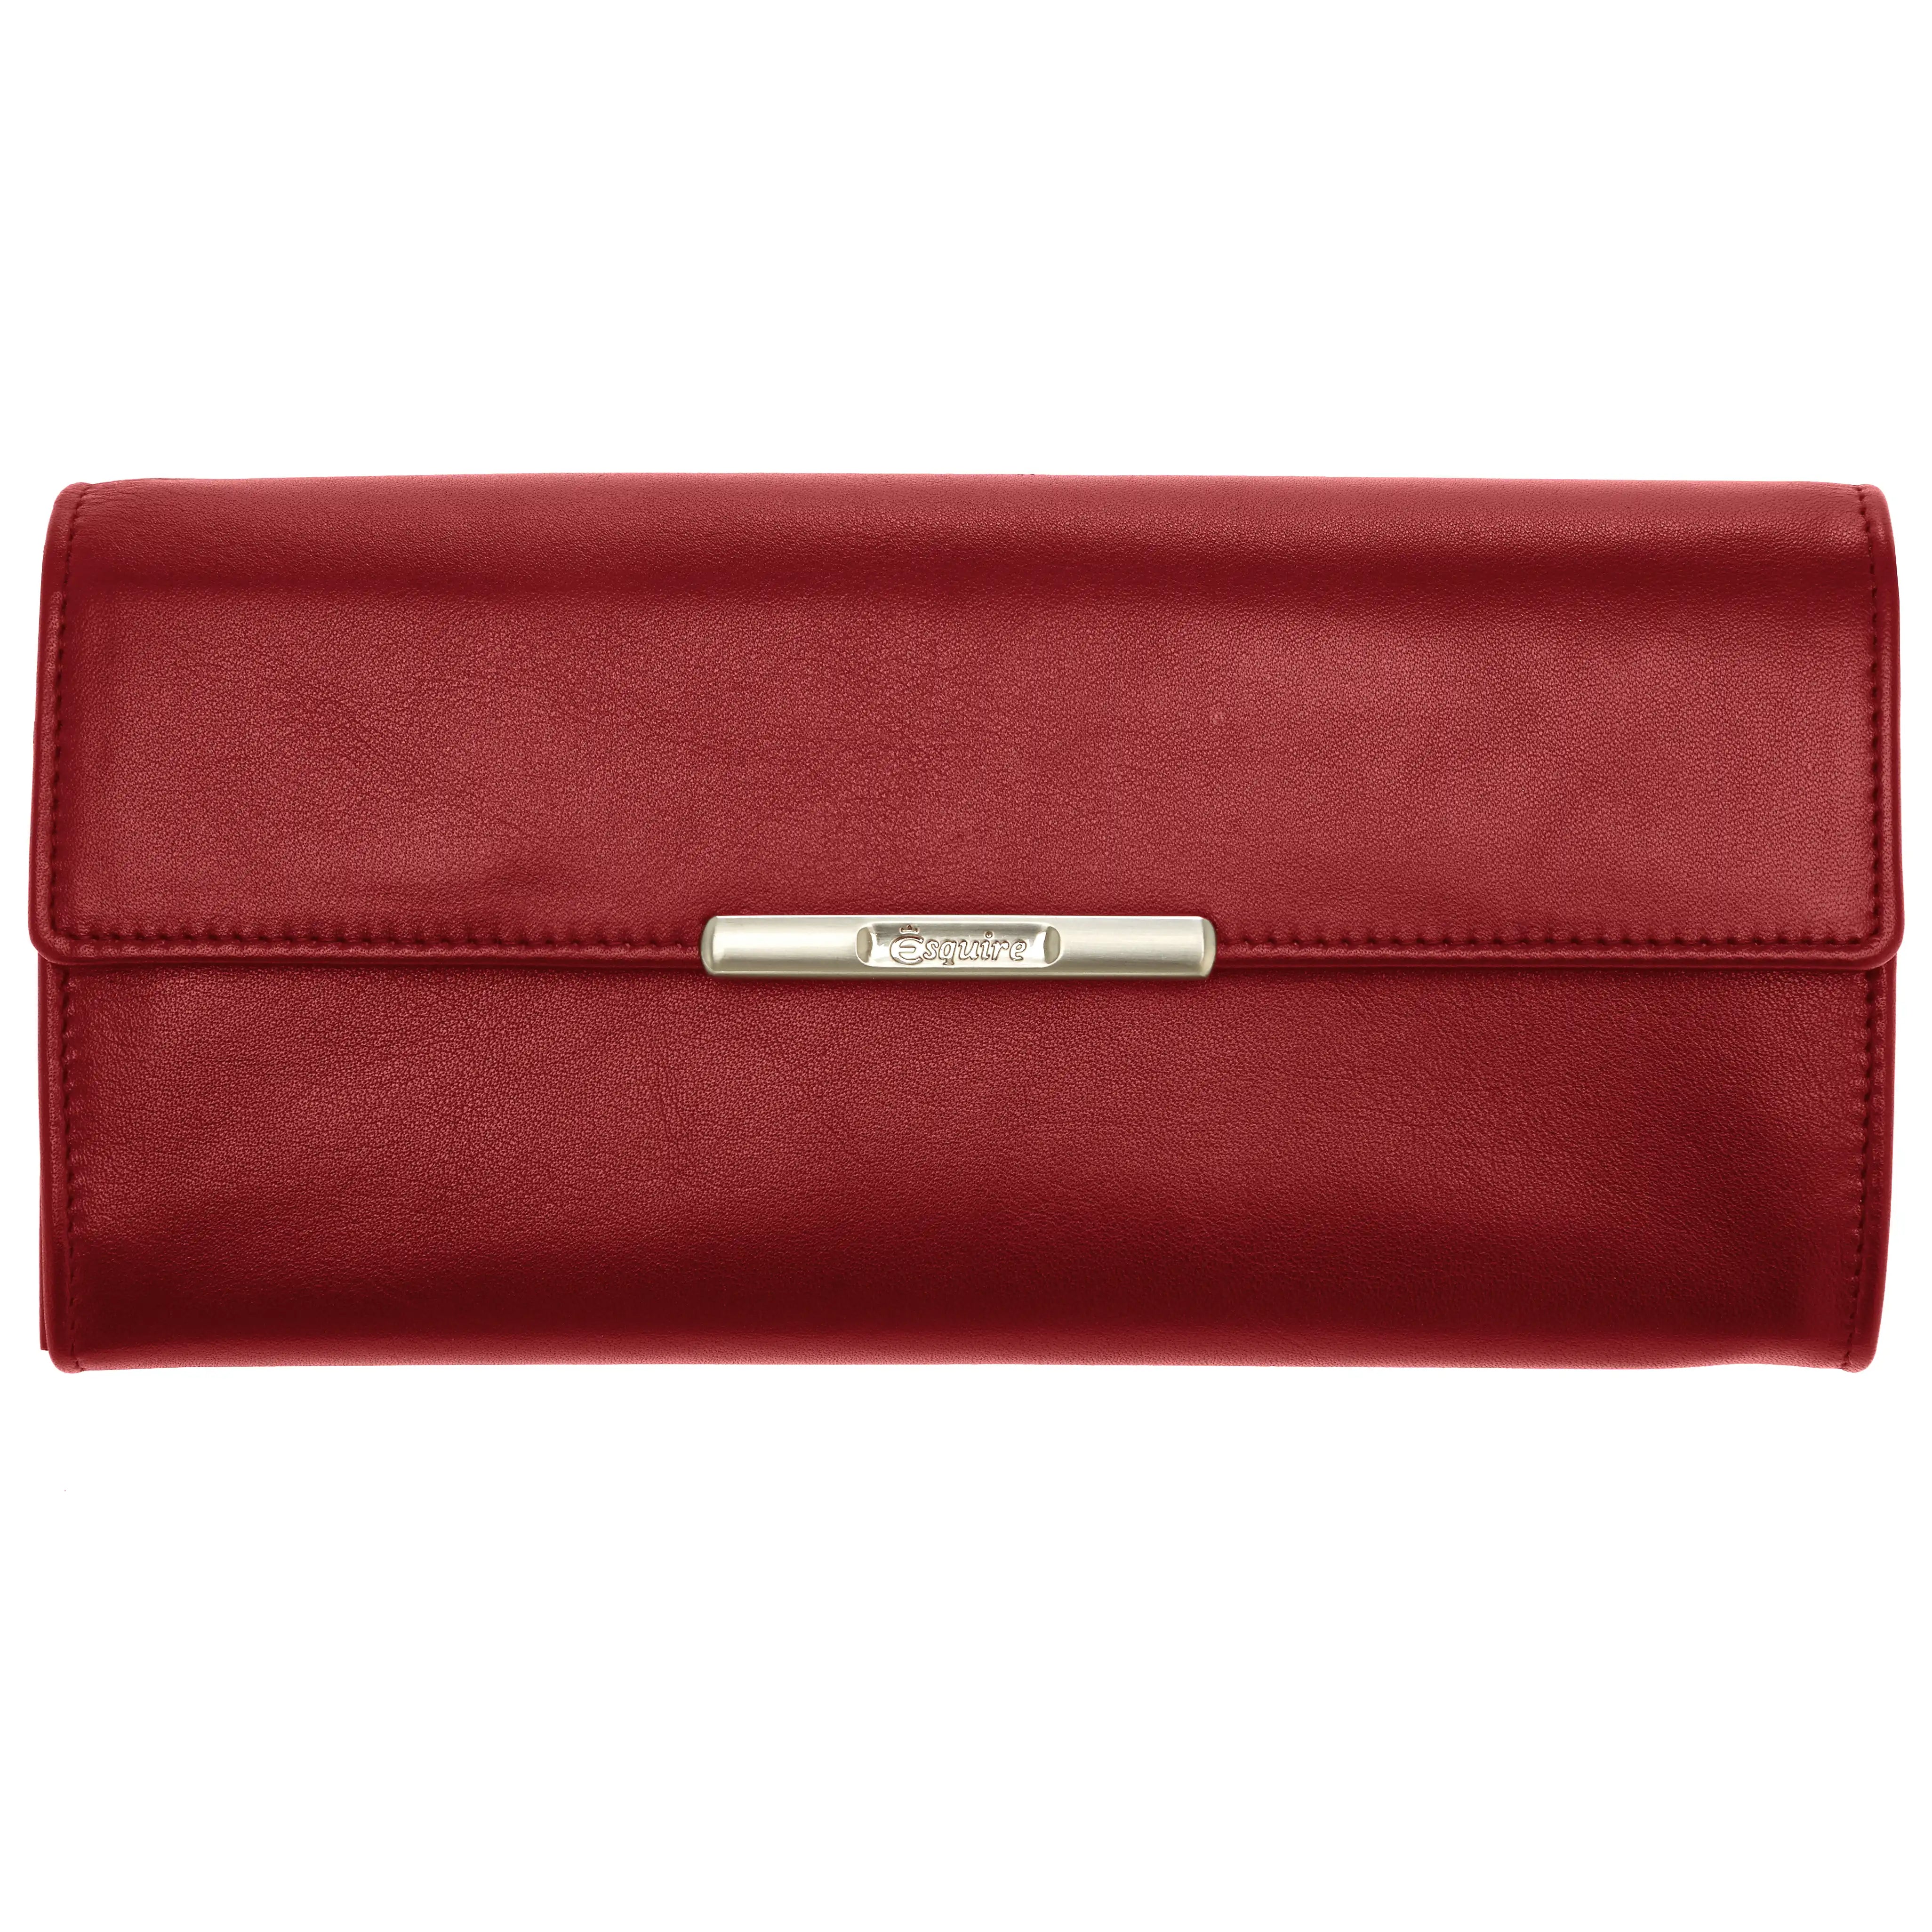 Esquire Helena ladies long purse 19 cm - red